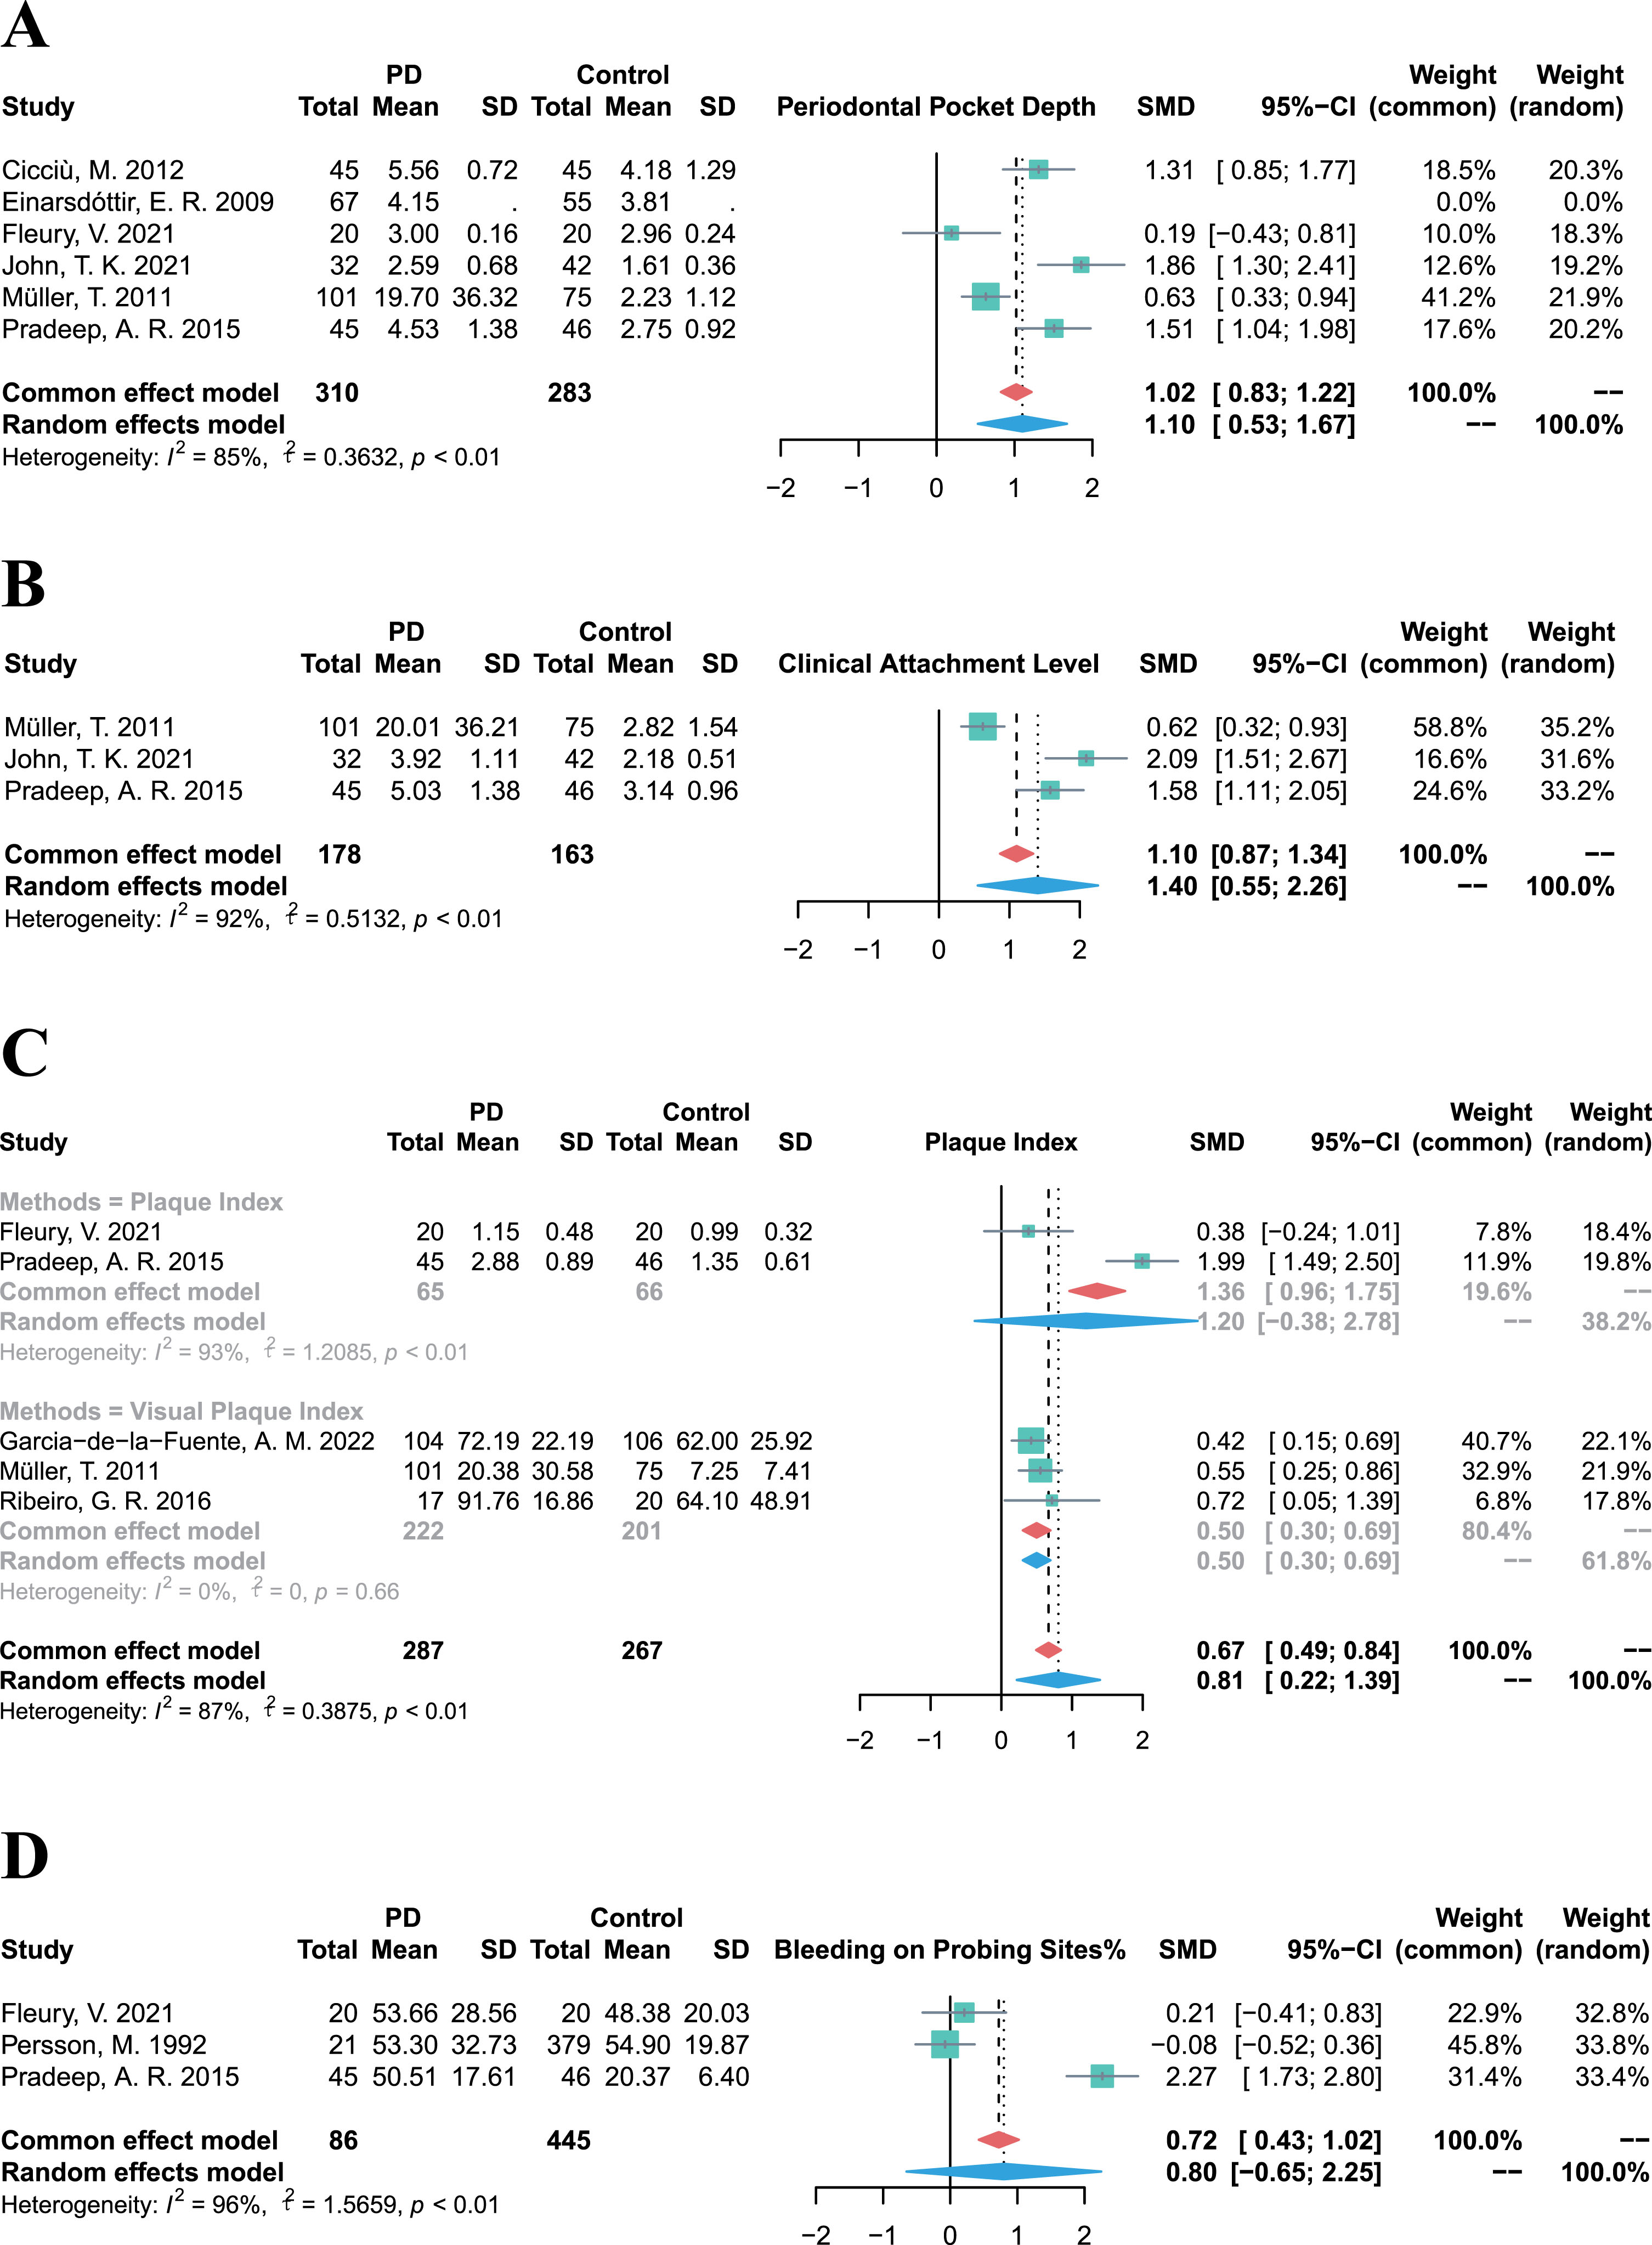 Forest plots of meta-analysis for PPD (A), CAL (B), PI (C), and BoP% (D) in patients with Parkinson’s disease.